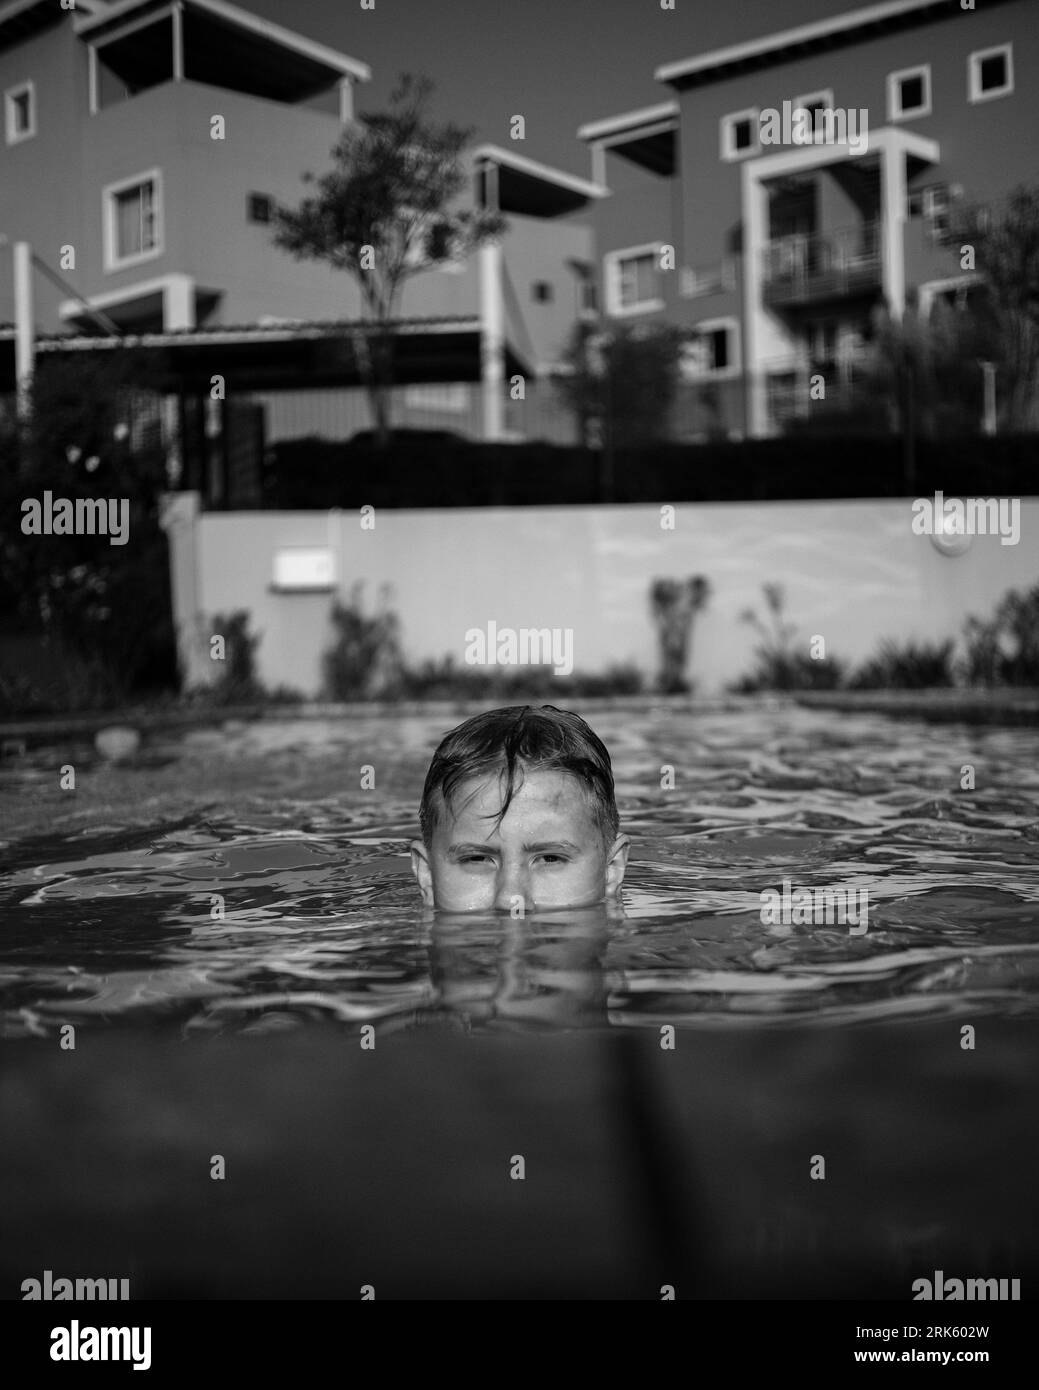 A young boy is submerged in a swimming pool, with his head tilted downwards, black and white image Stock Photo